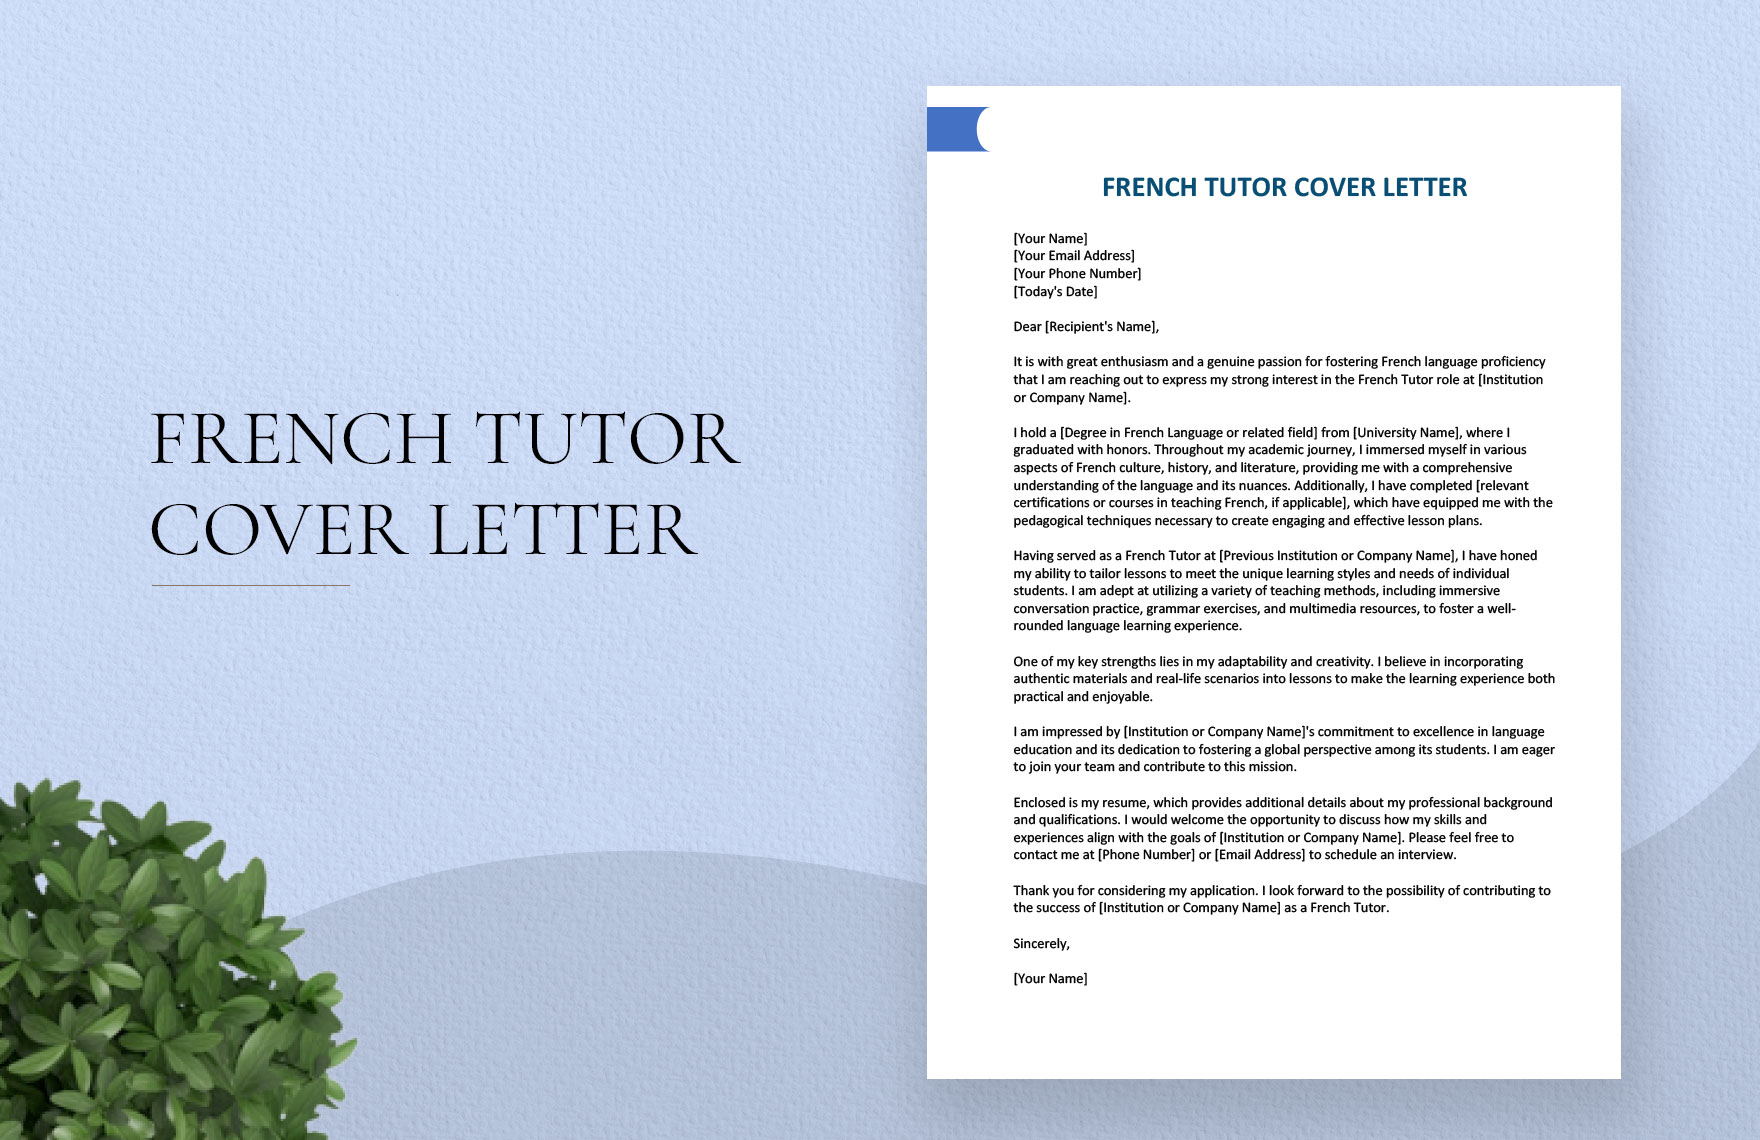 French Tutor Cover Letter in Word, Google Docs